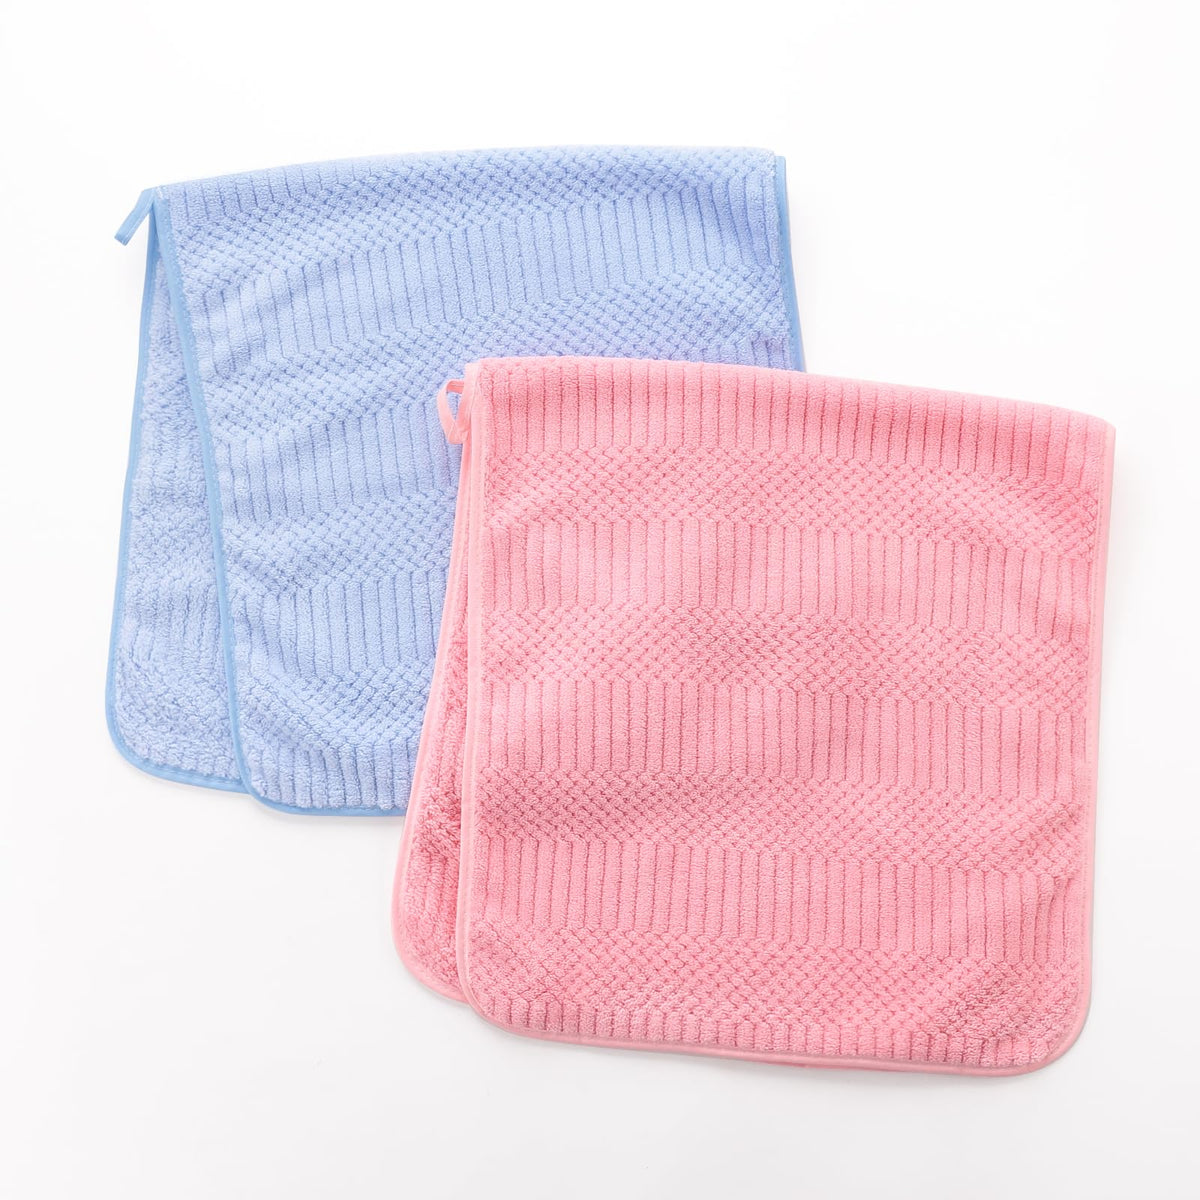 Homestic 2 Piece Hand Towel Set|280 GSM|Gtm & Workout Towels|Super Absorbent & Antibacterial Treatment|Small Size, Travel Friendly (Blue & Pink)